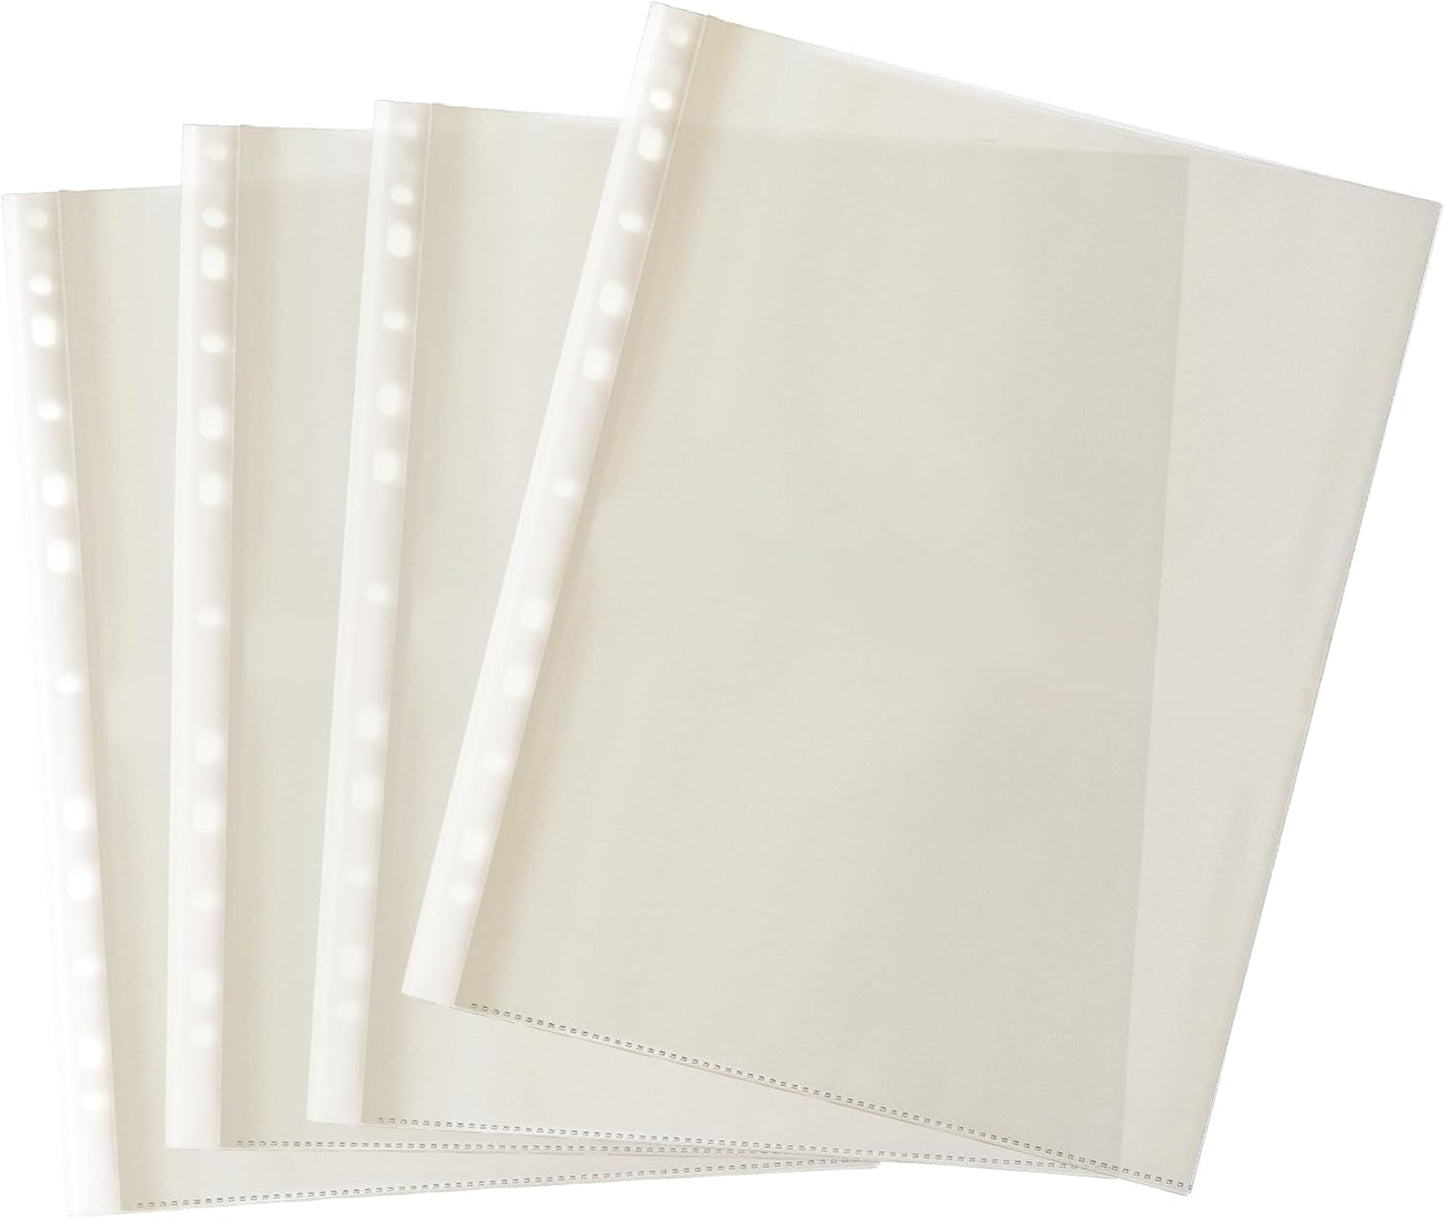 Pack of 250 A4 Glass Clear Punched Pockets by Janrax